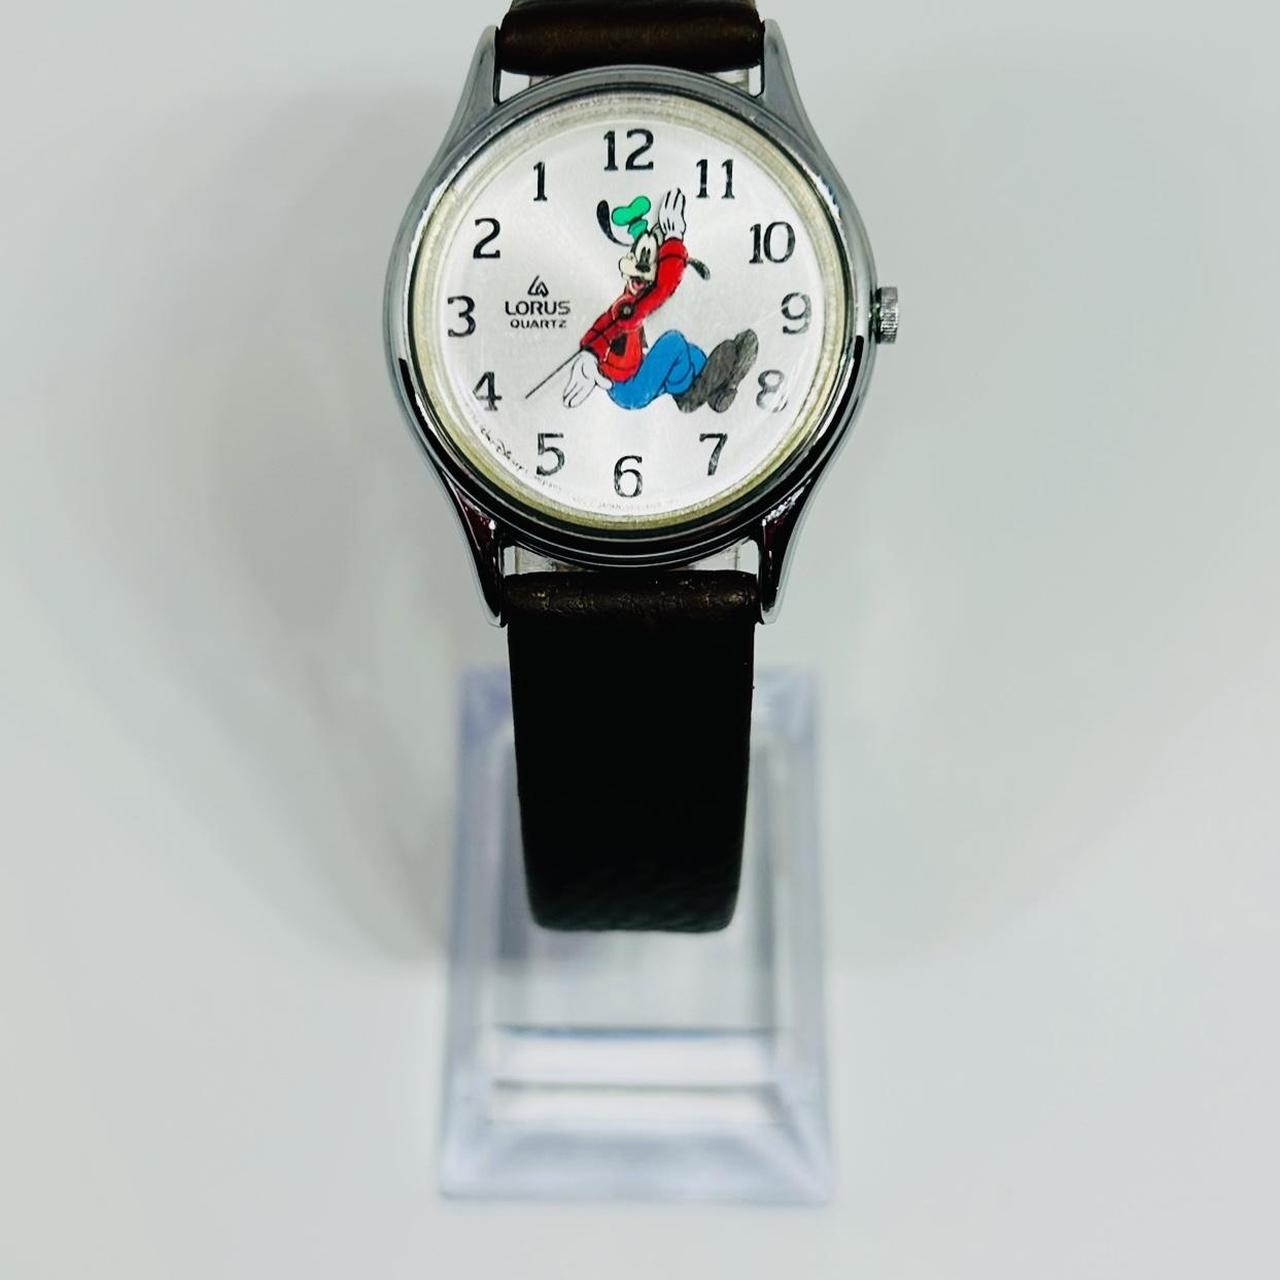 GOOFY WATCH EXCLUSIVELY FOR THE WALT DISNEY COMPANY JAPAN MOV'T HONG KONG  BAND | eBay